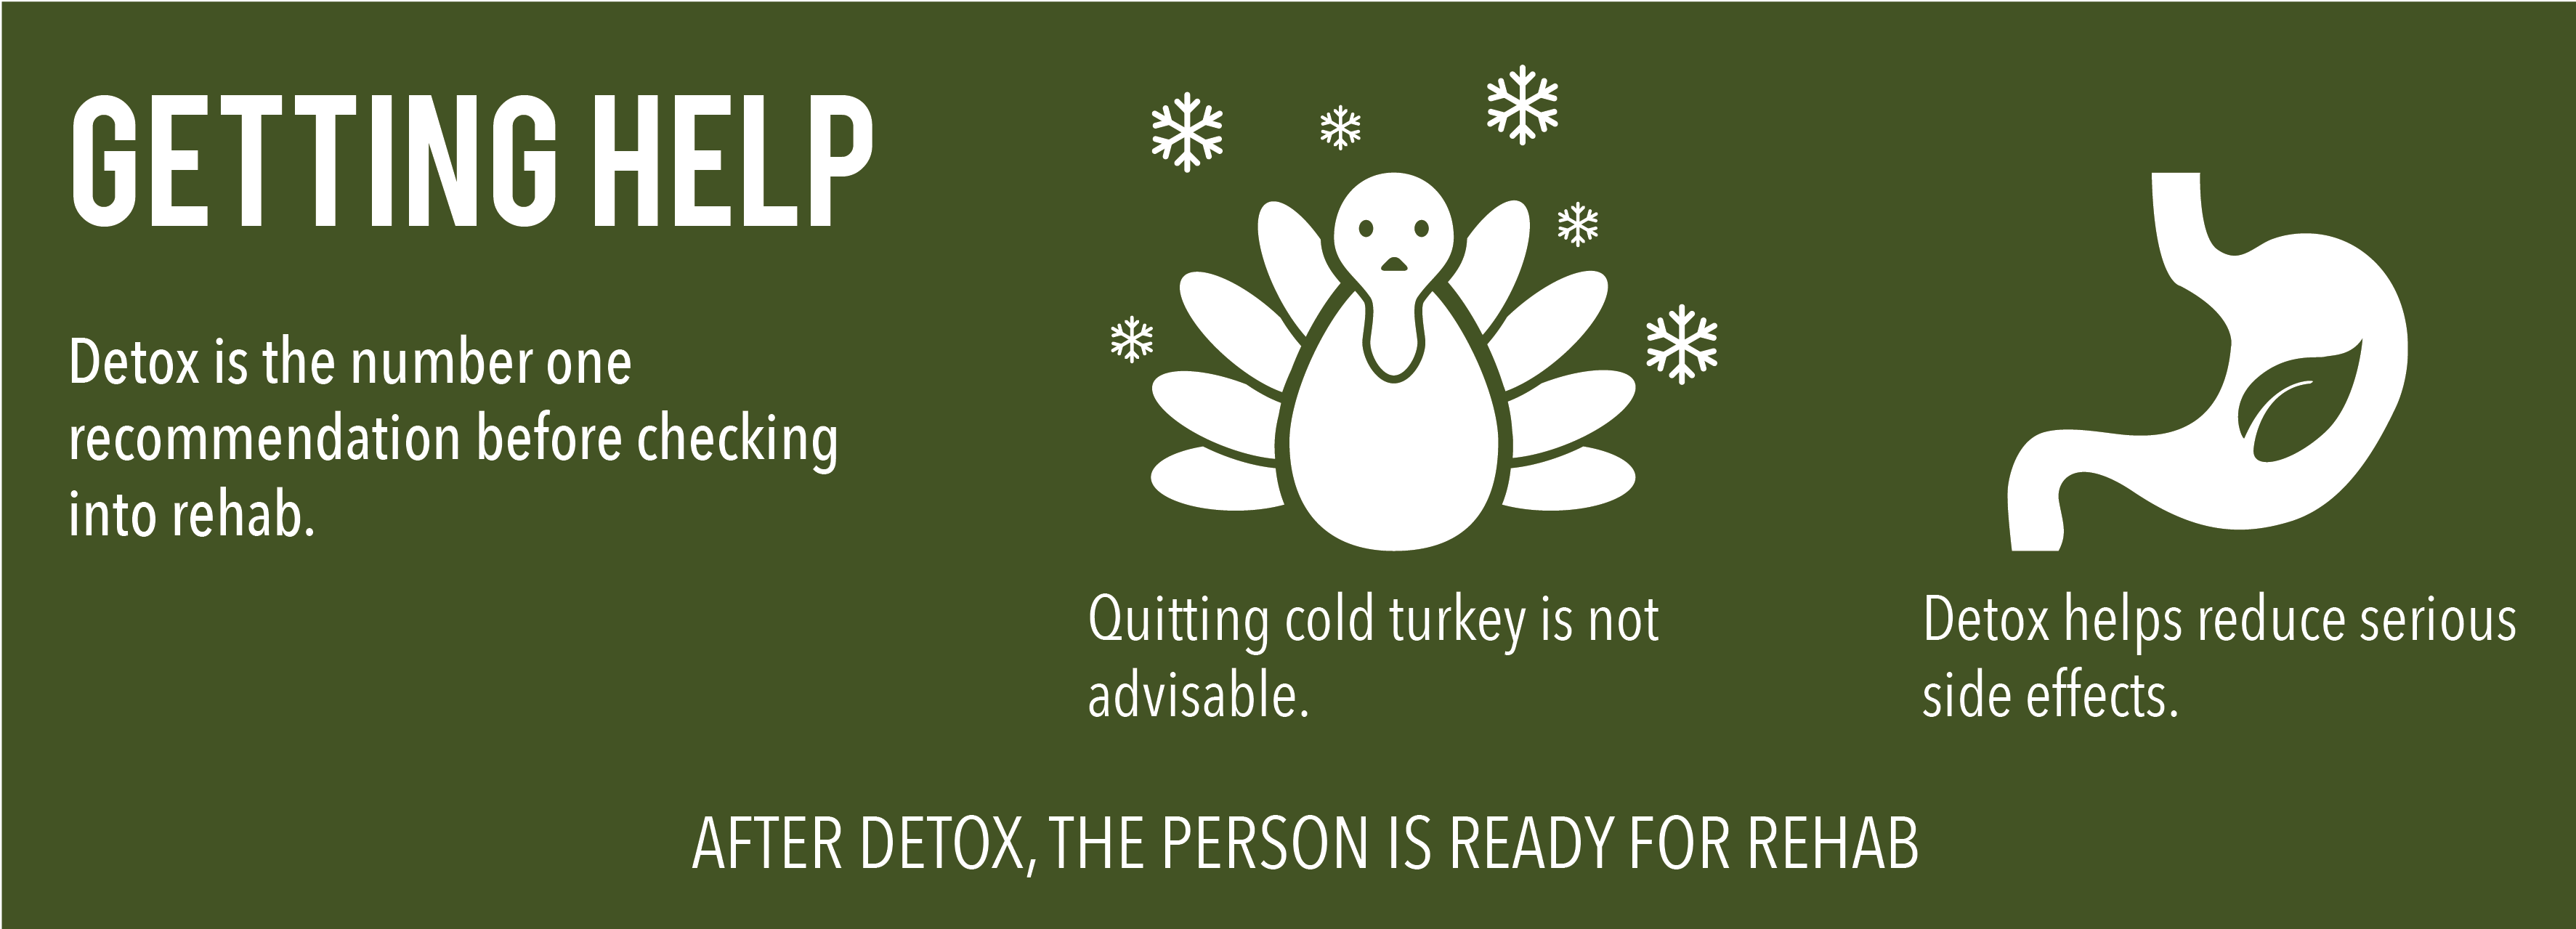 Detox is the number one recommendation before checking into rehab, quitting cold turkey is not advisable, detox helps reduce serious side effects, after detox, the person is ready for rehab